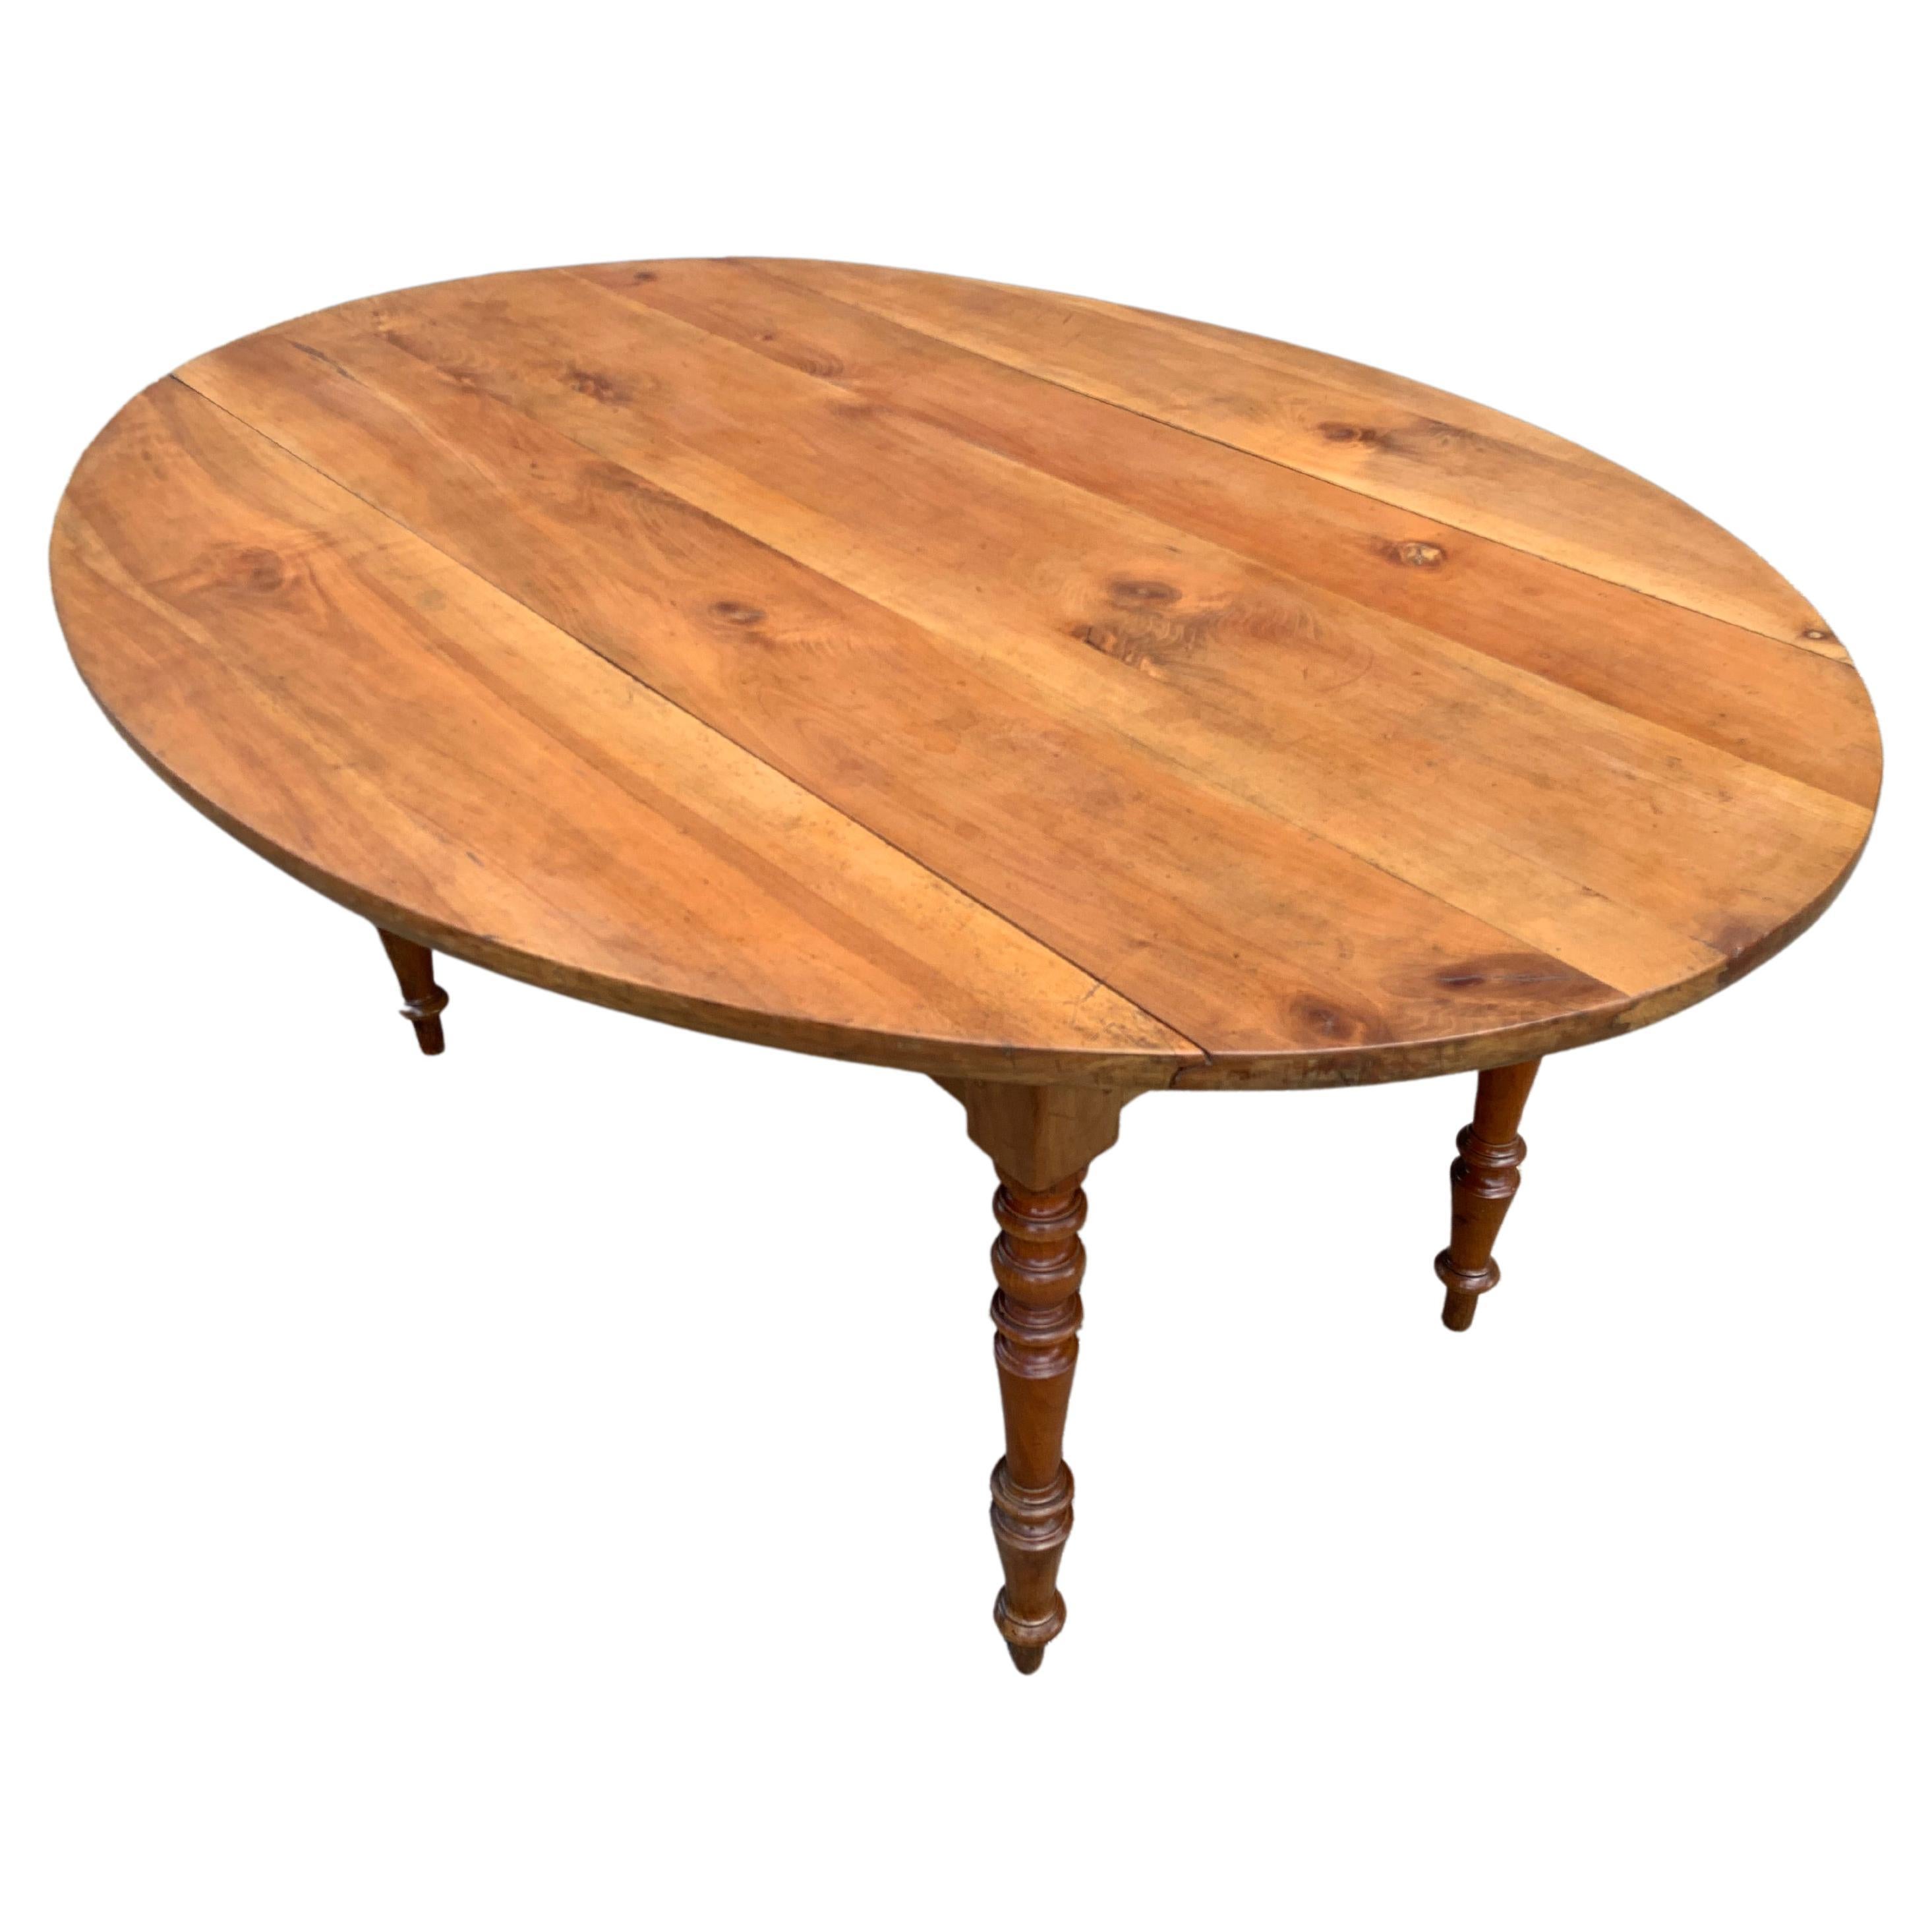 Antique Cherry Tapered Leg Oval Drop Leaf Table For Sale